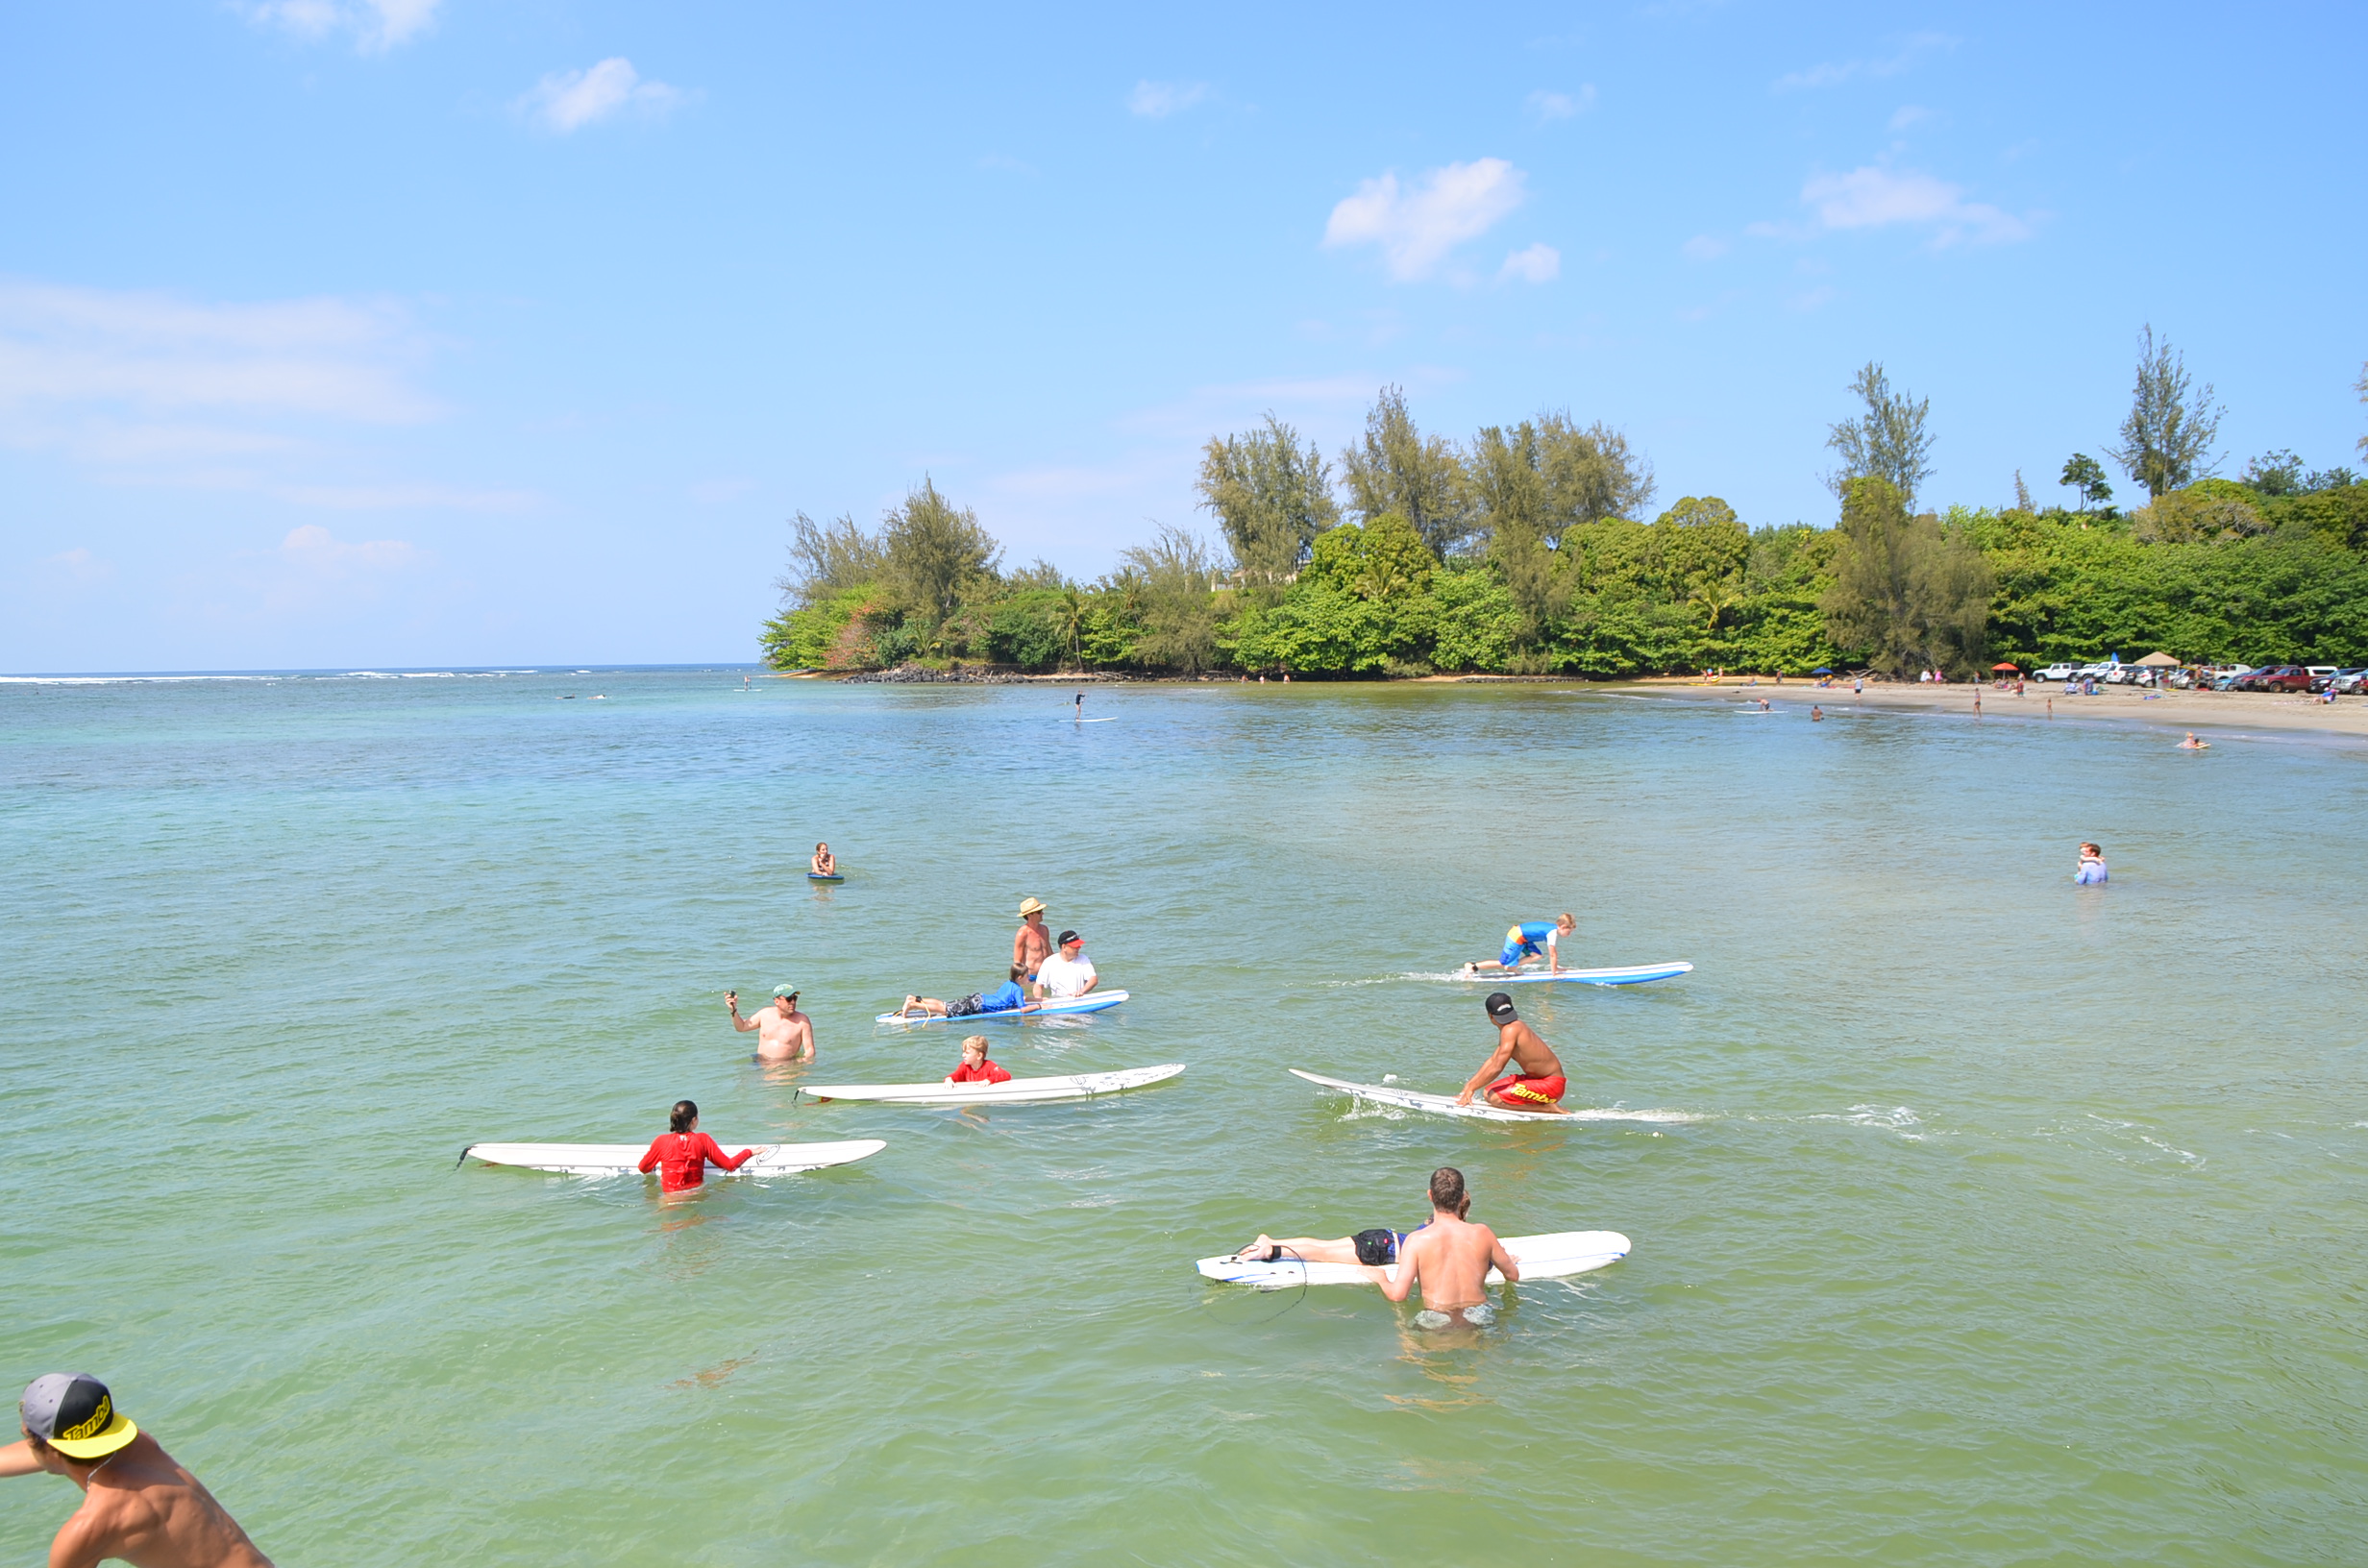 Learning to surf at Hanalei Bay